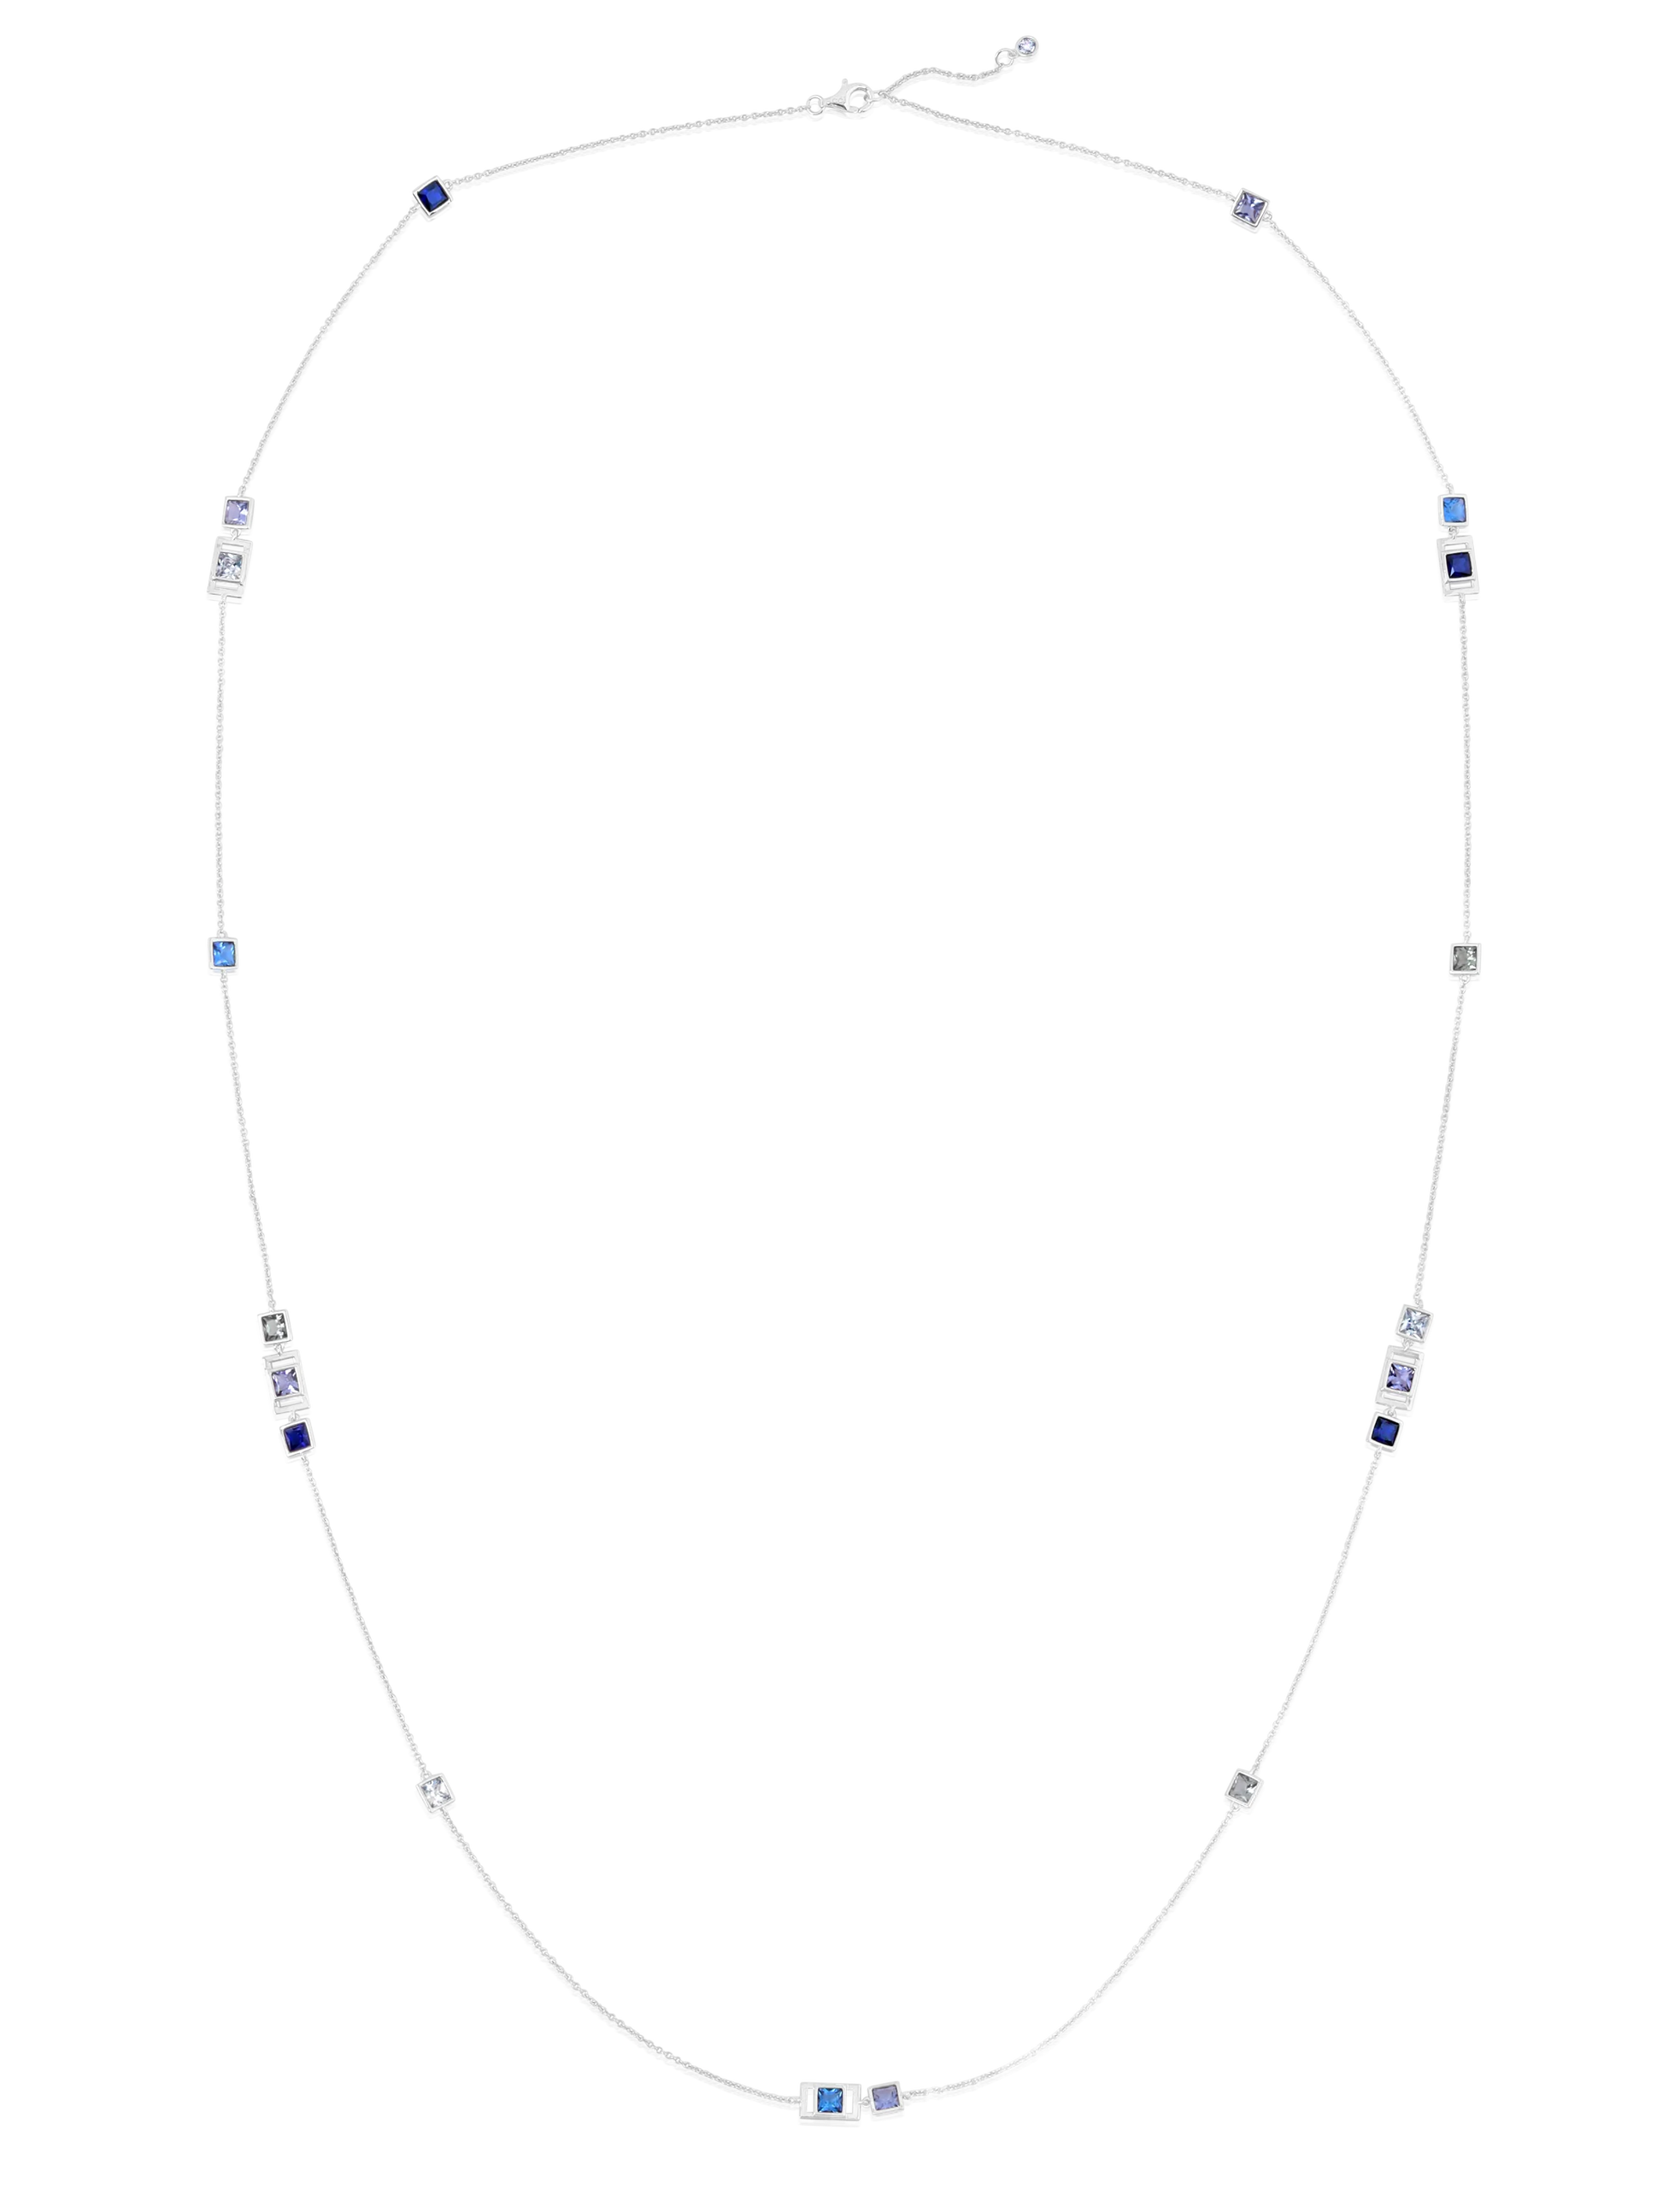 Square Princess Cut Periwinkle Colored Stone Station Necklace 34"